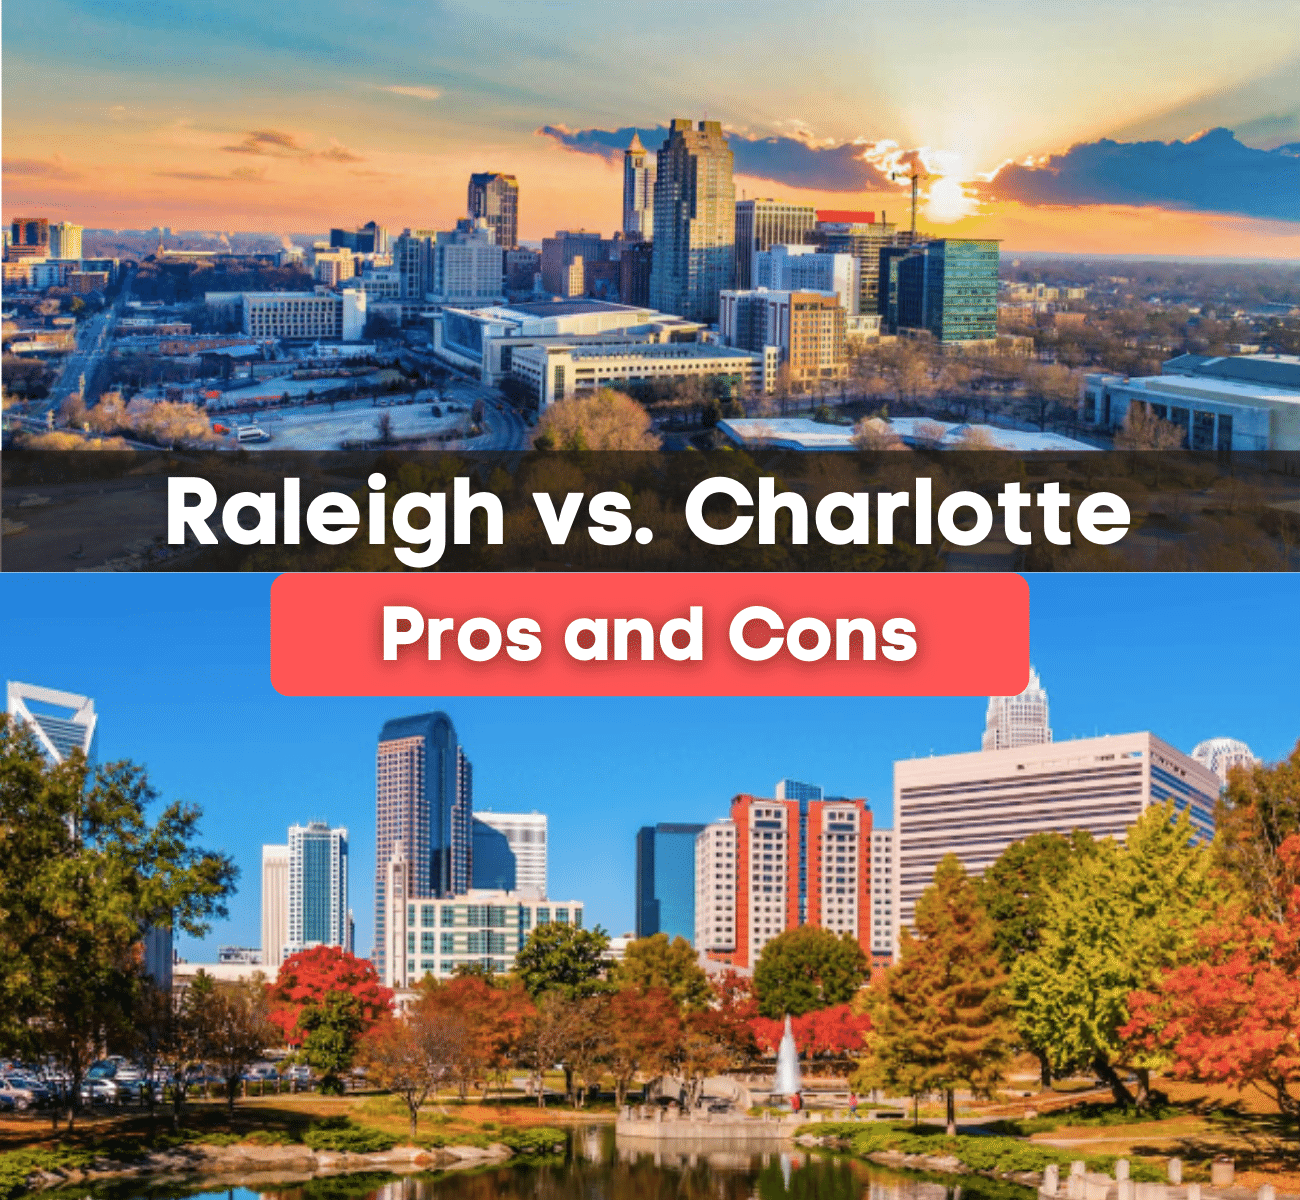 Raleigh Vs Charlotte pros and cons - Raleigh and Charlotte, NC skyline